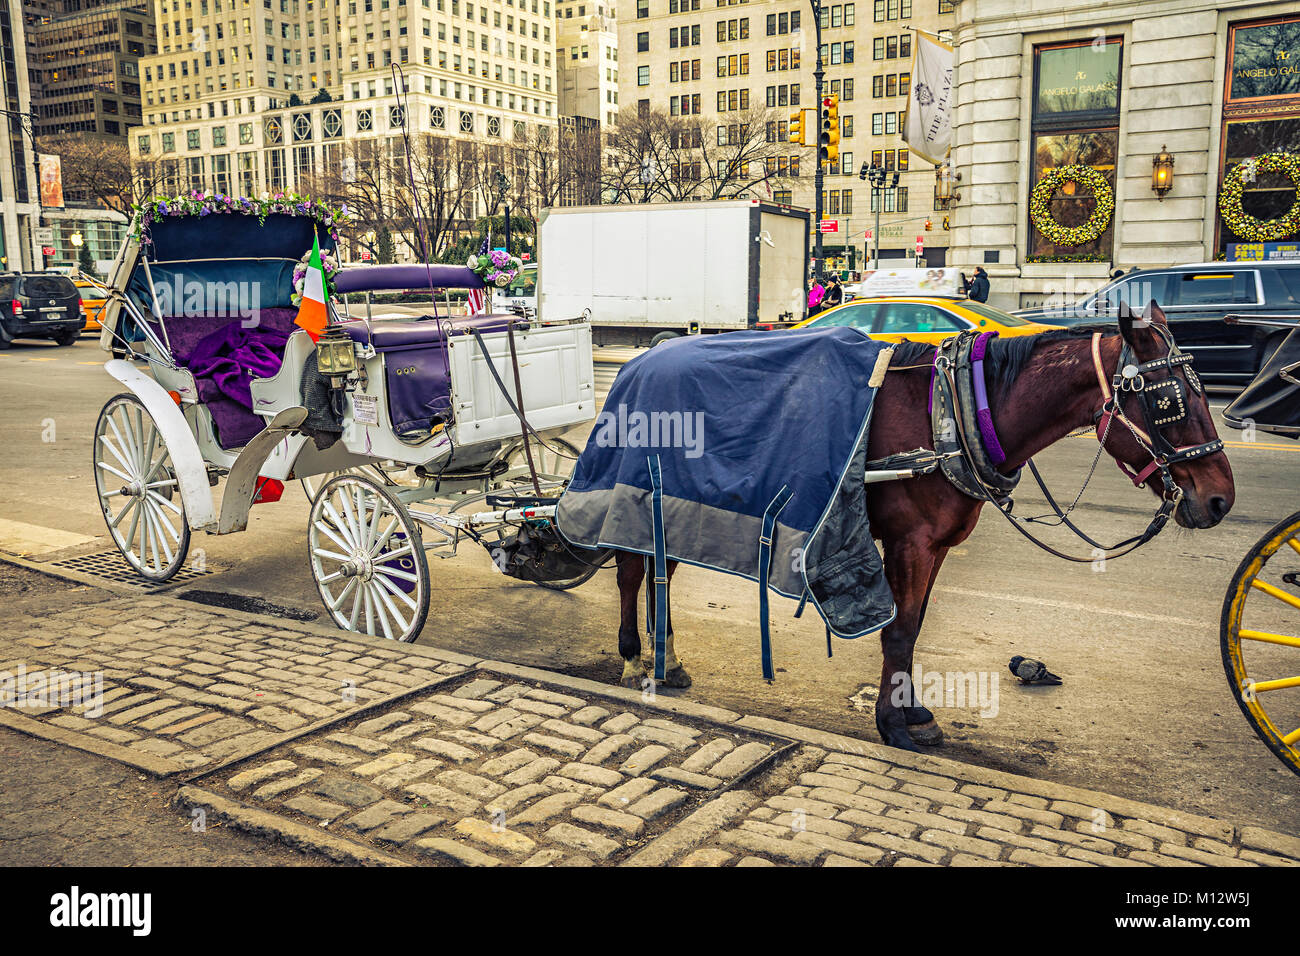 Horse carriage at Central park in New York City Stock Photo